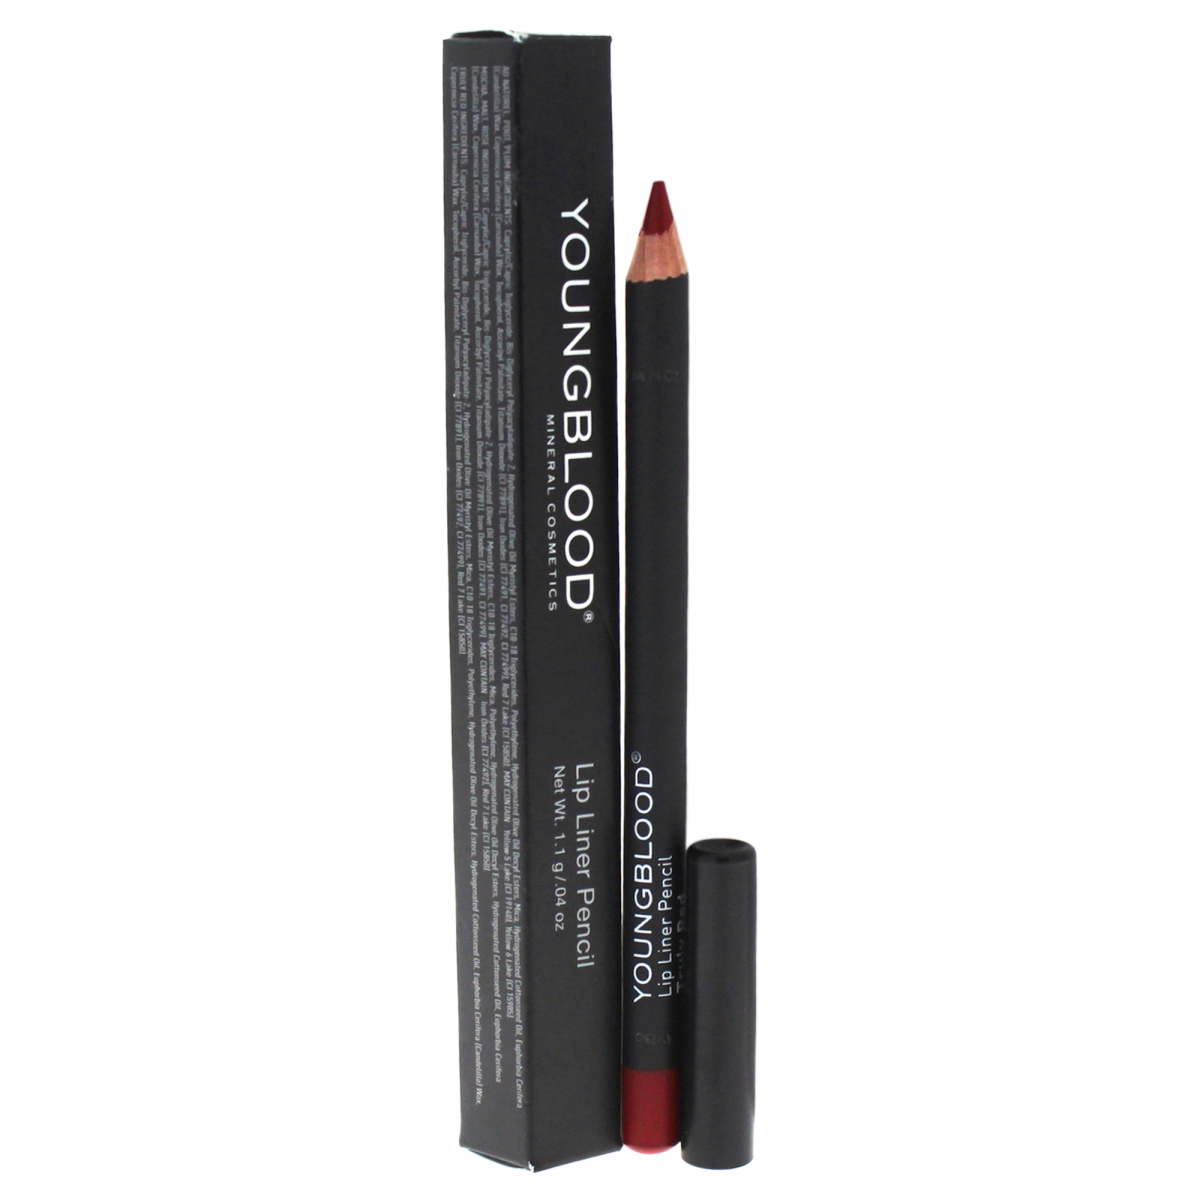 W-c-11974 Lip Liner Pencil - Truly Red For Women - 1.10 Oz